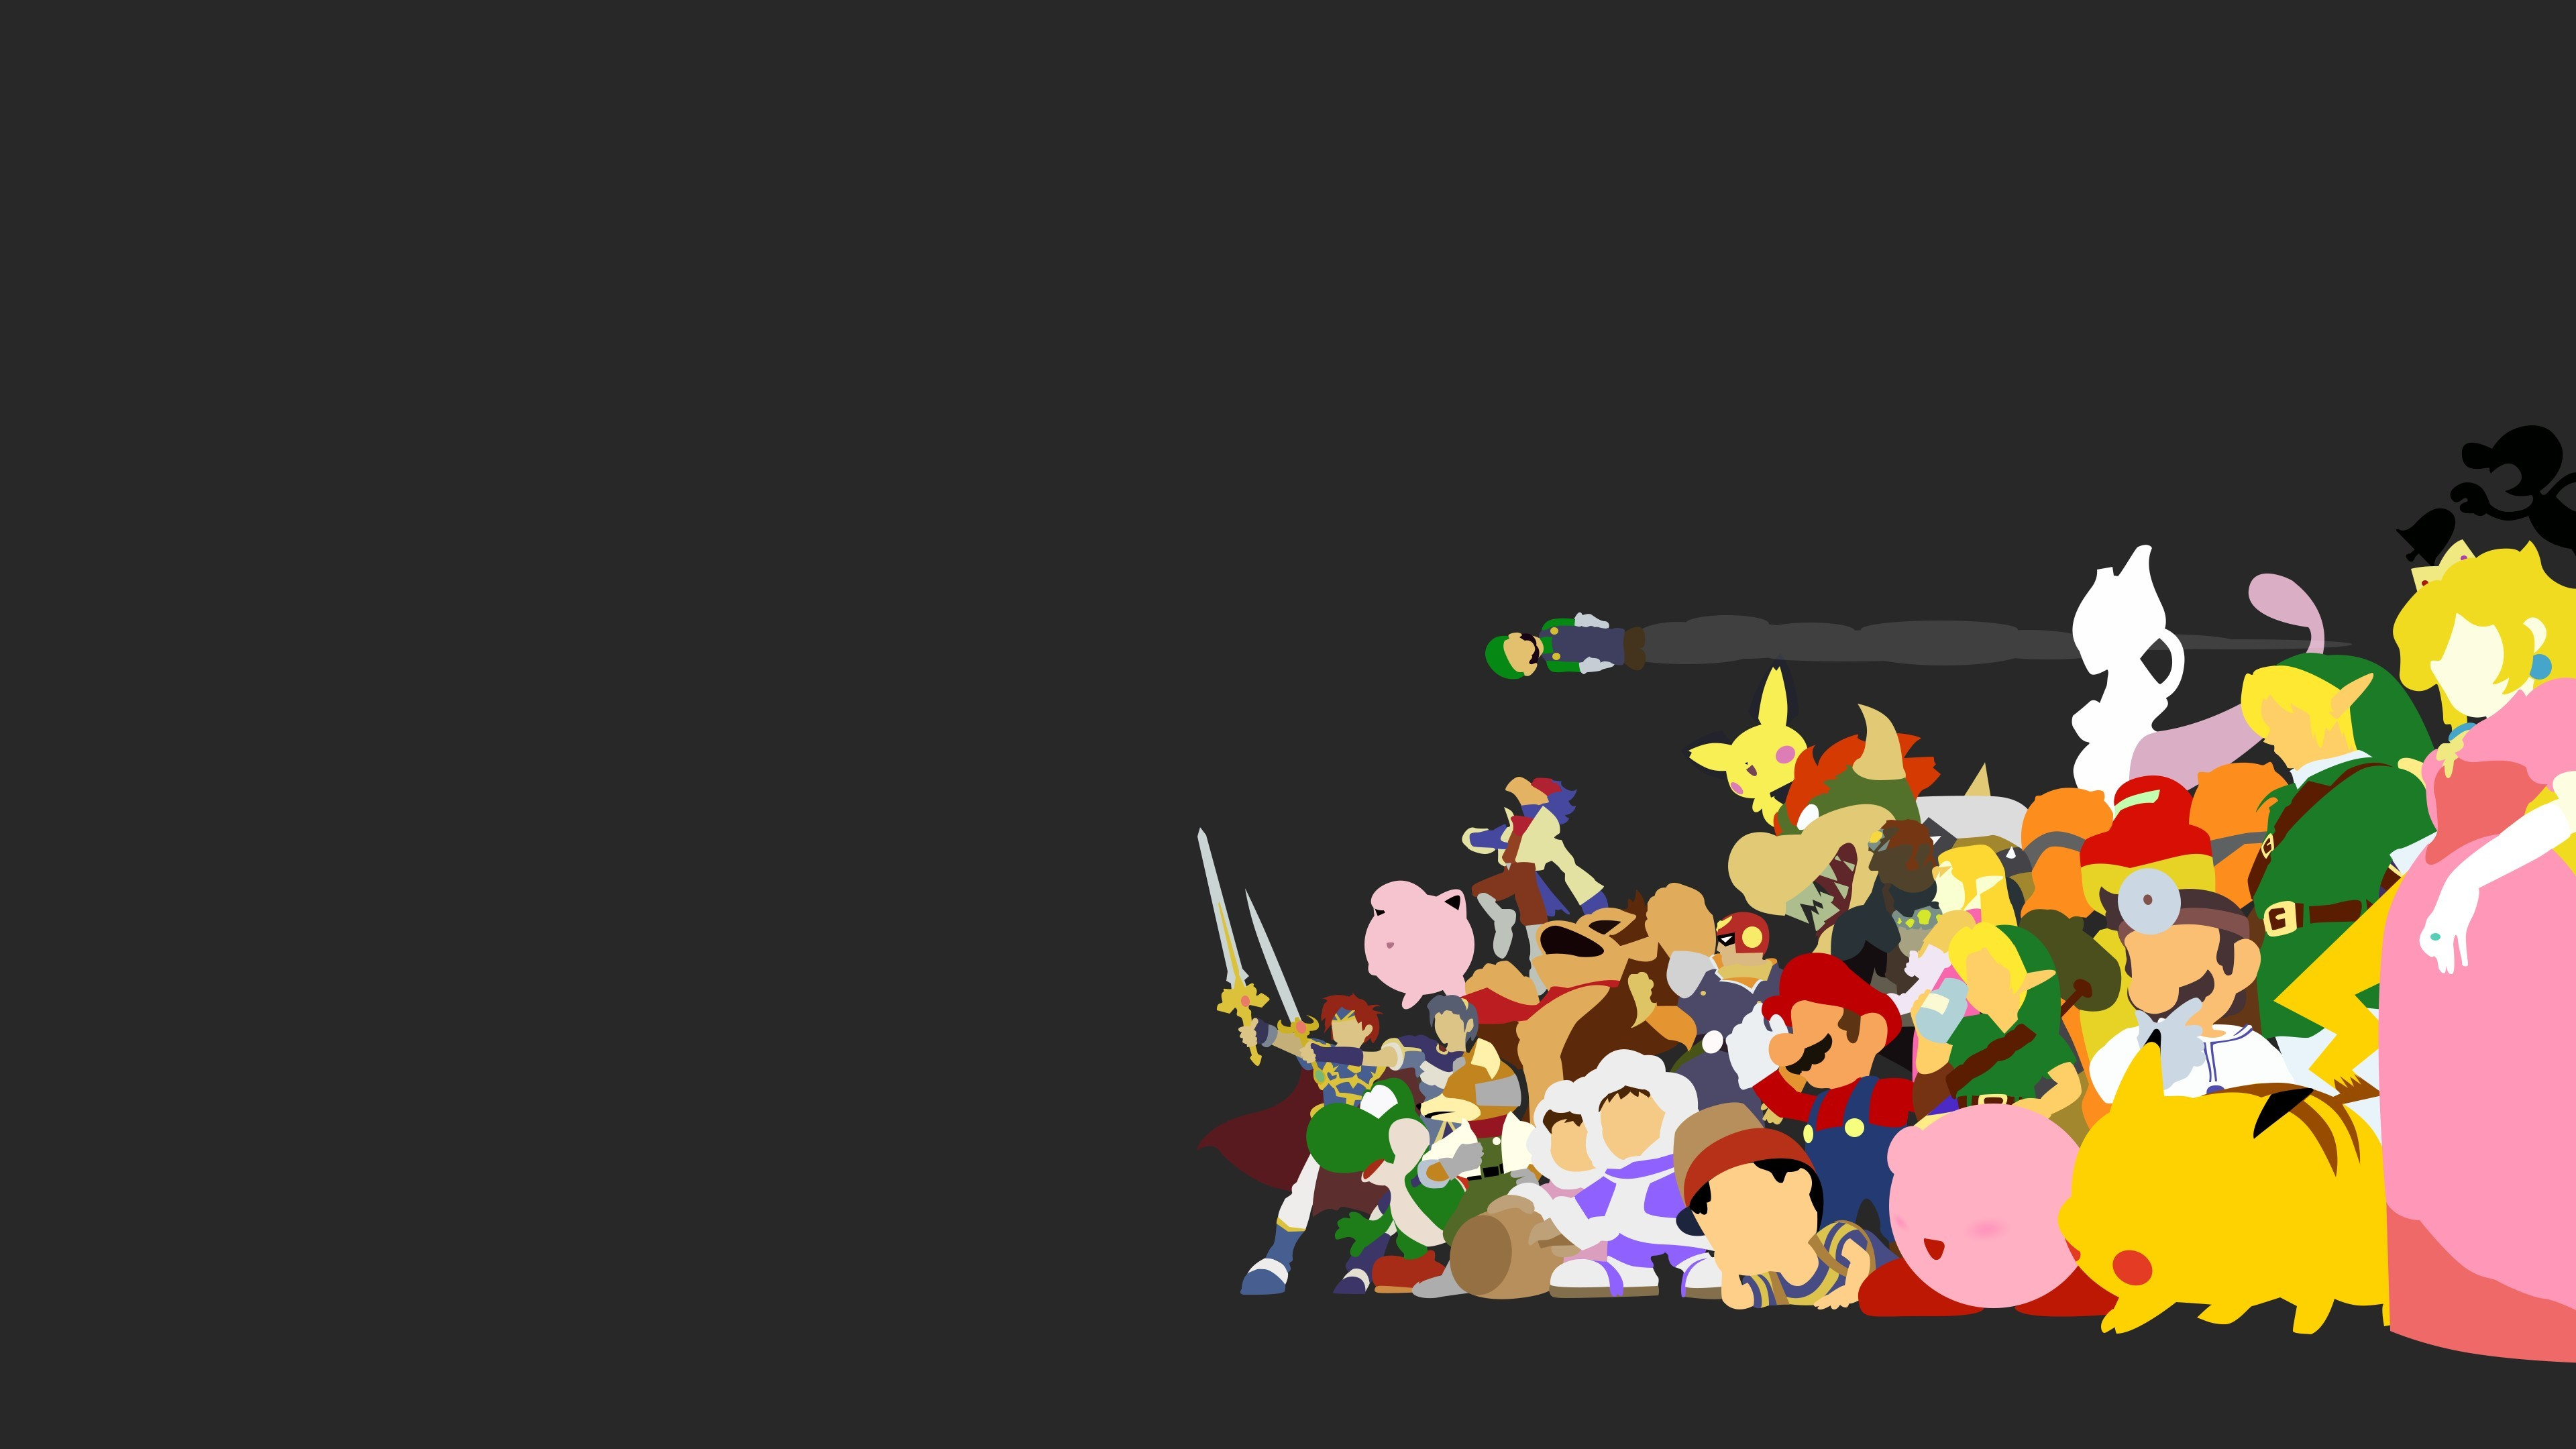 3840x2160 80+ Super Smash Bros. HD Wallpapers and Backgrounds